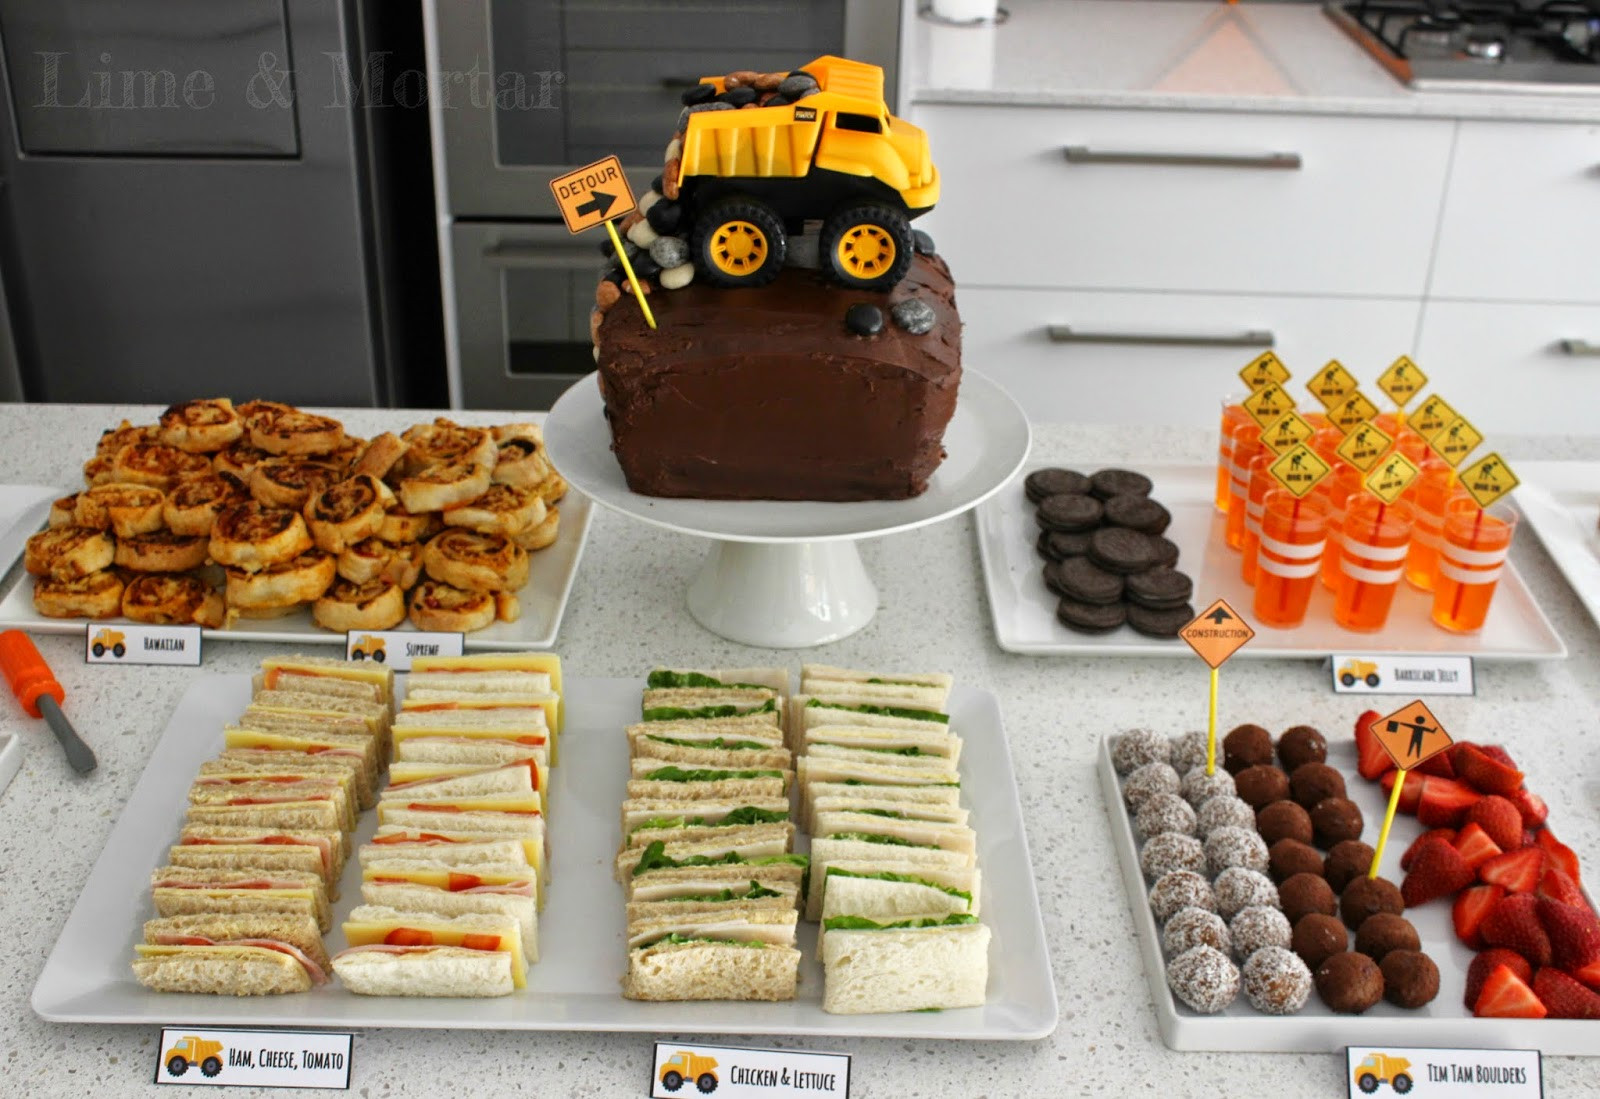 Construction Party Food Ideas
 Lime & Mortar Construction Theme Party Food